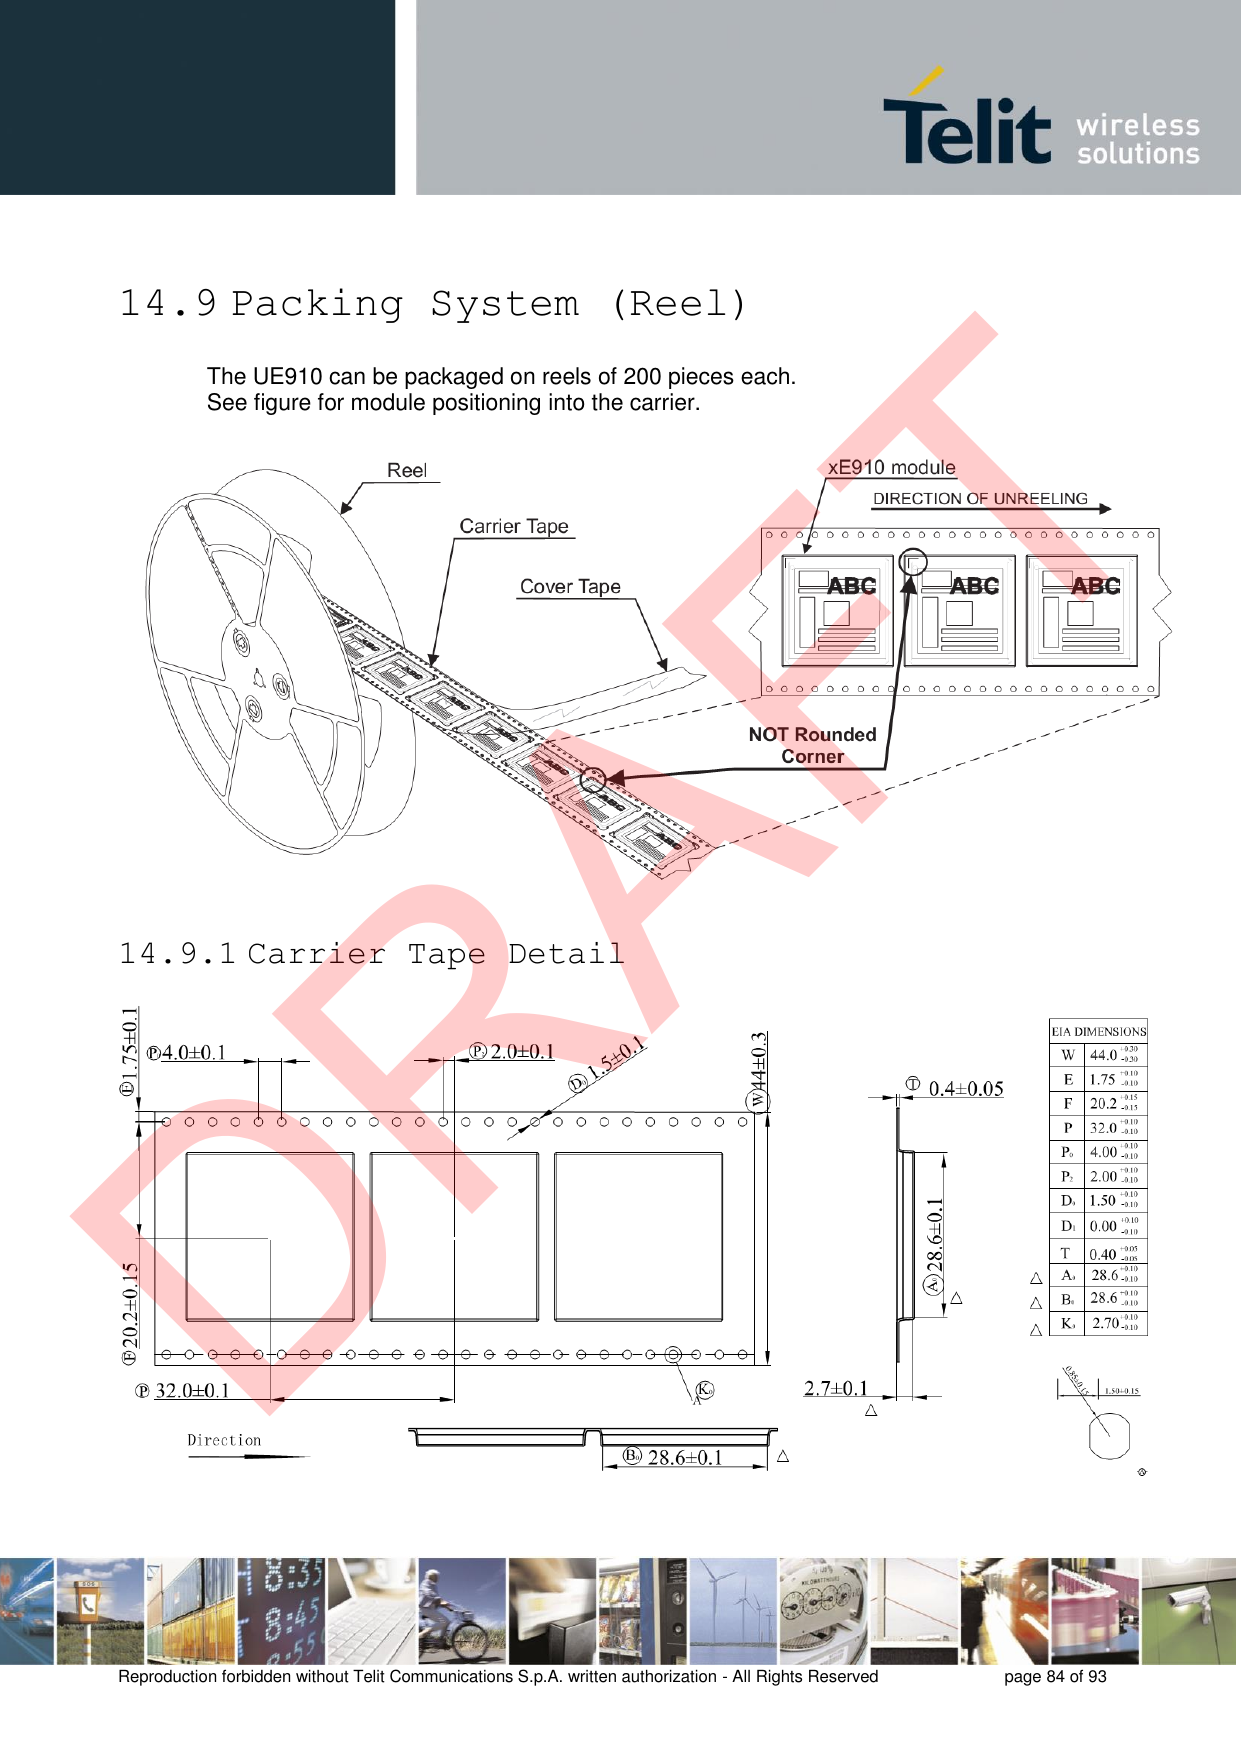 Reproduction forbidden without Telit Communications S.p.A. written authorization - All Rights Reserved  page 84 of 93 14.9 Packing System (Reel) The UE910 can be packaged on reels of 200 pieces each. See figure for module positioning into the carrier. 14.9.1 Carrier Tape Detail DRAFT